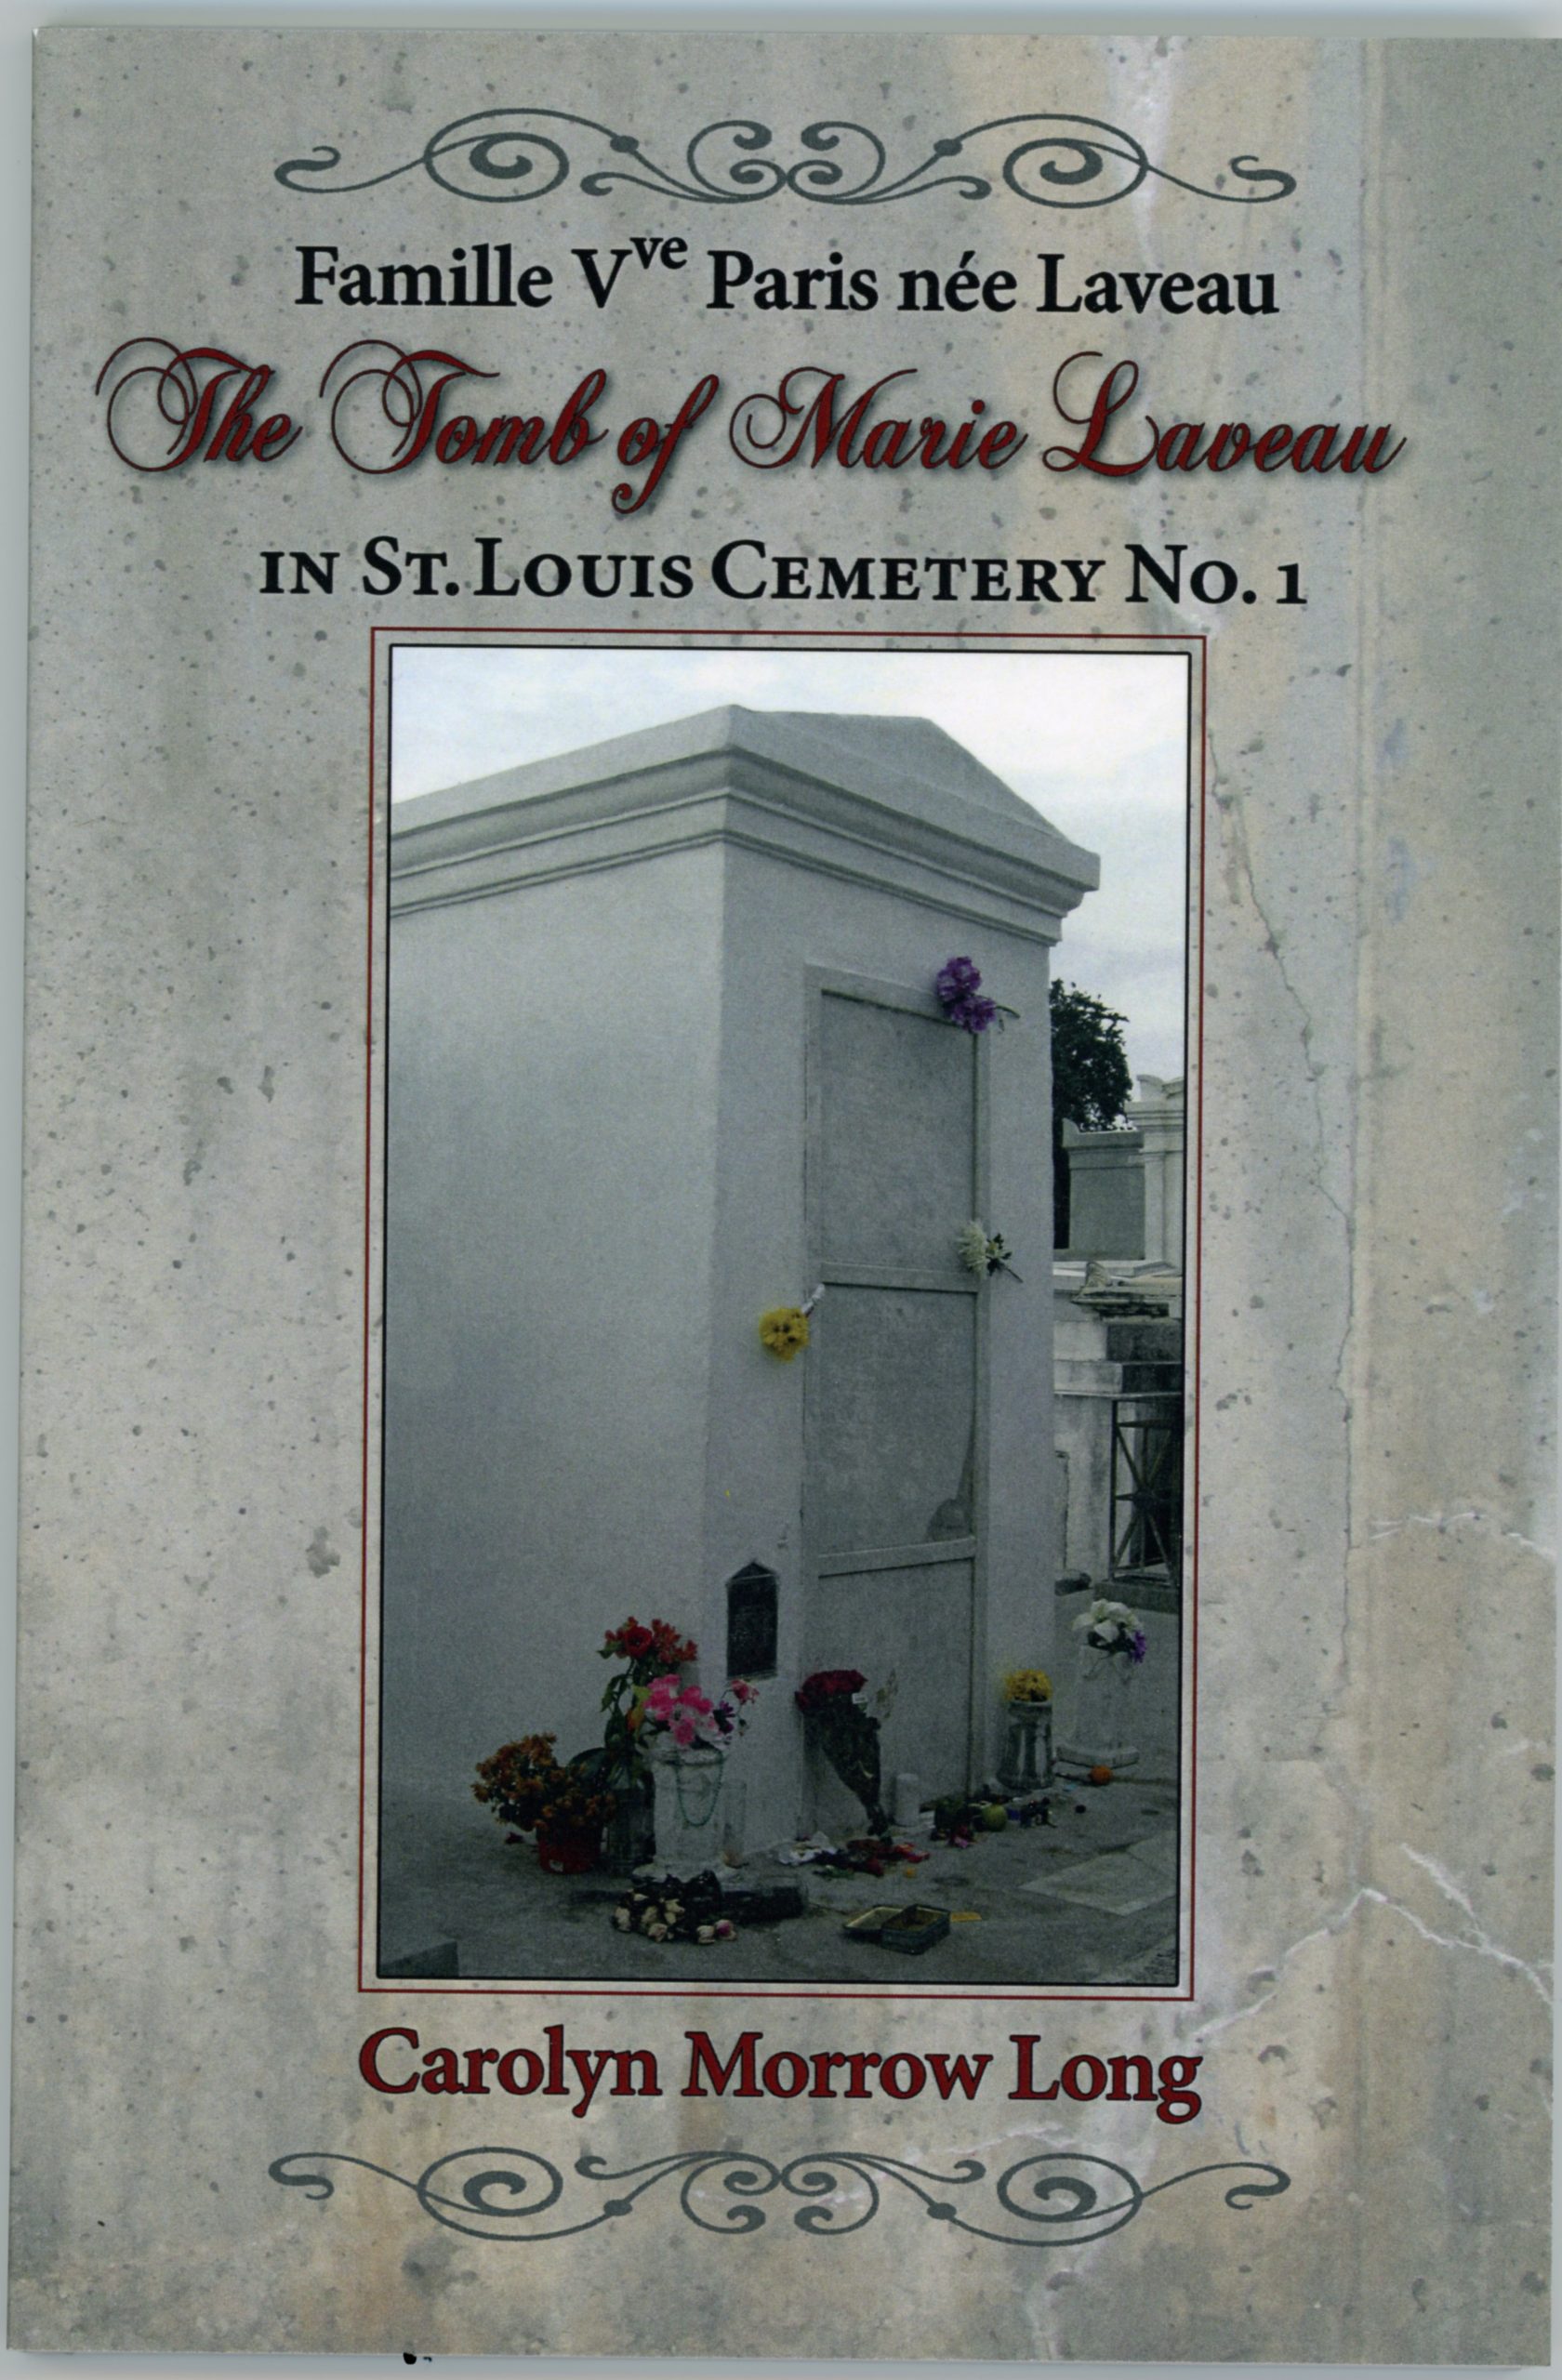 2016 The Tomb of Marie Laveau front cover